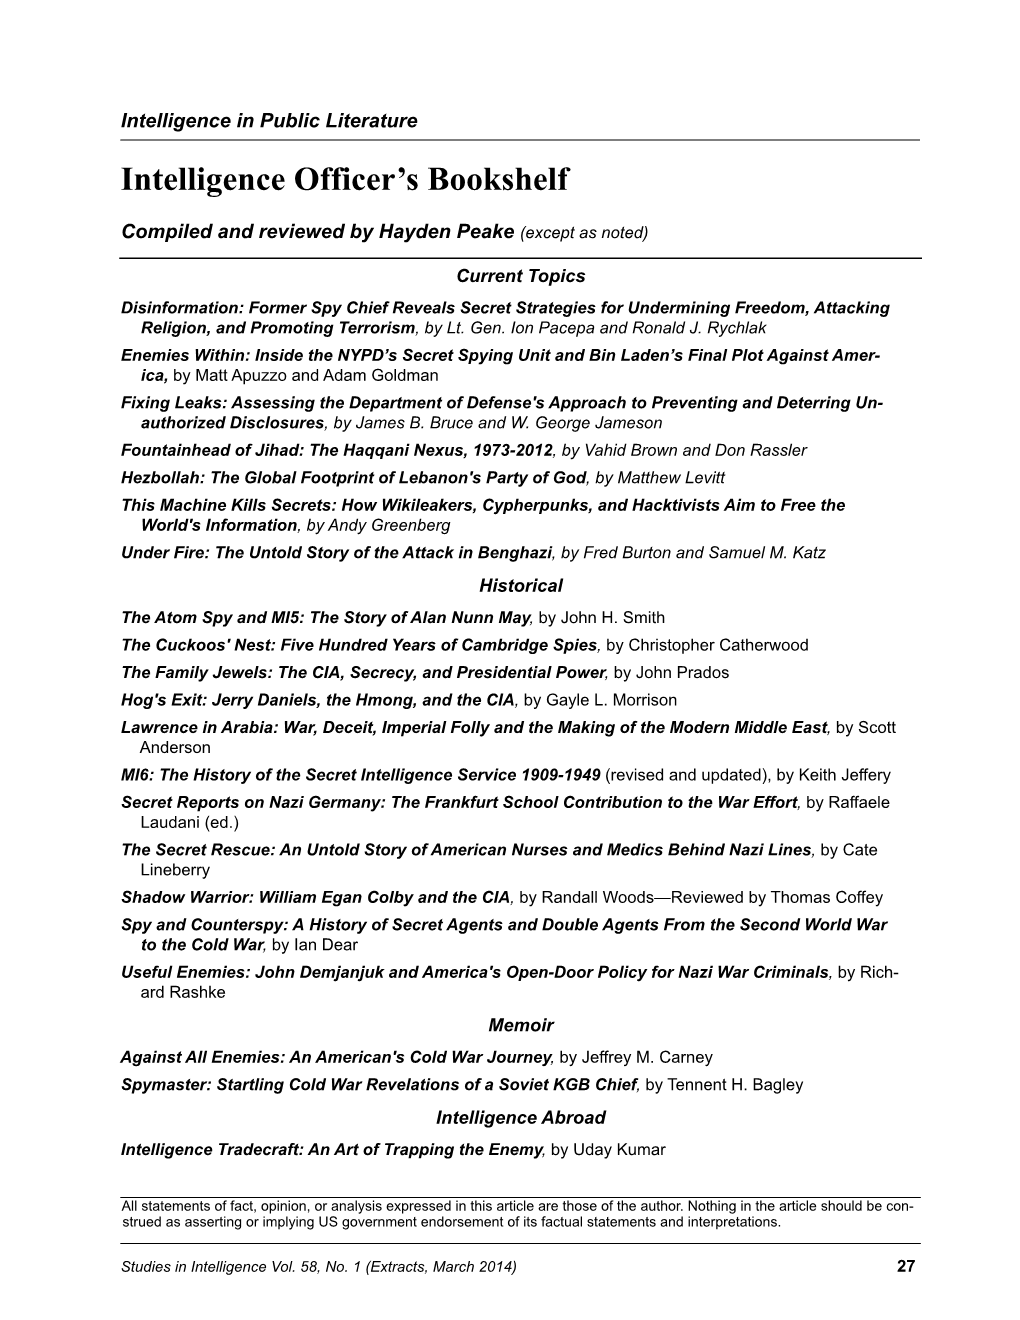 Studies in Intelligence 58 No. 1 (Extracts, March 2014)